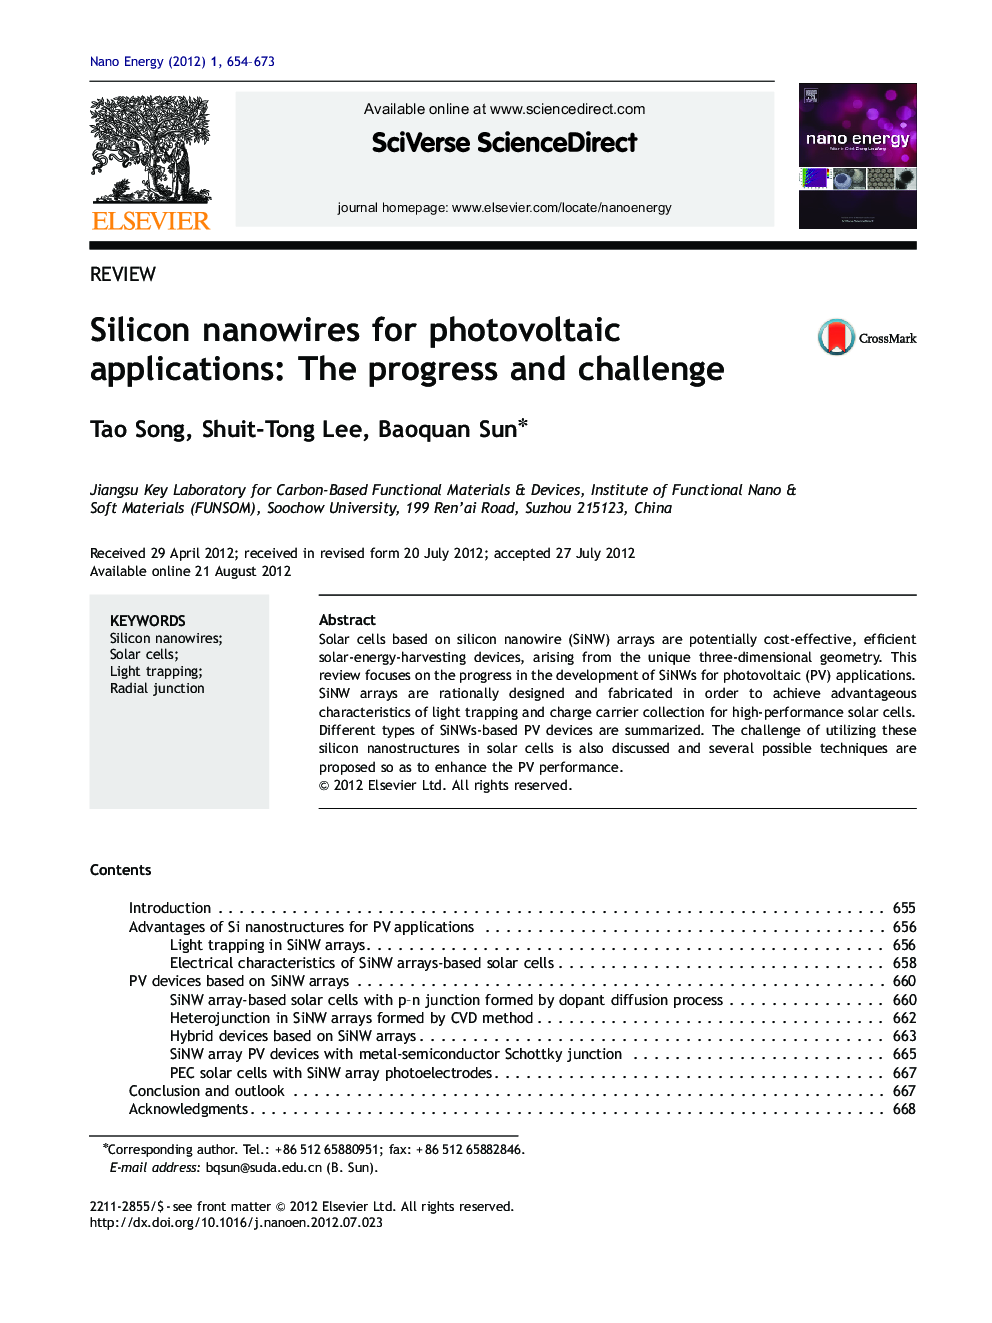 Silicon nanowires for photovoltaic applications: The progress and challenge